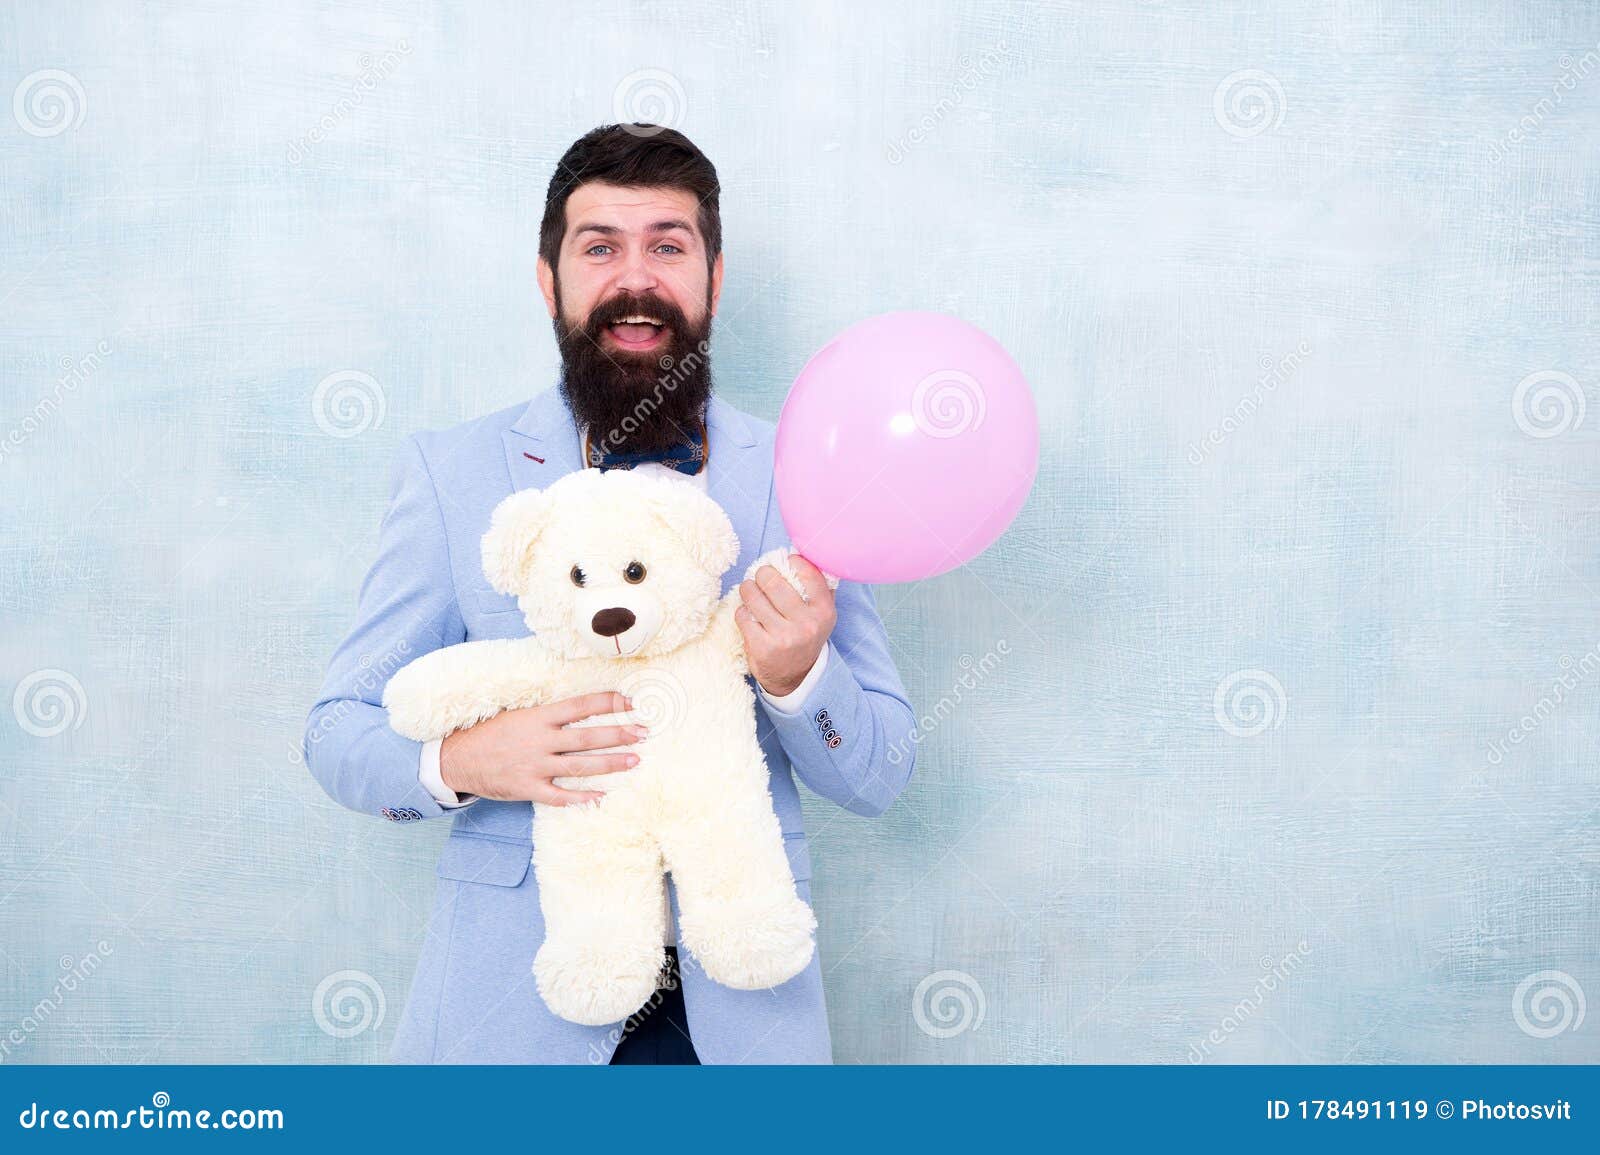 womens day. greetings 8 march. stereotypical gifts. valentines day. romantic man with teddy bear and air balloon waiting